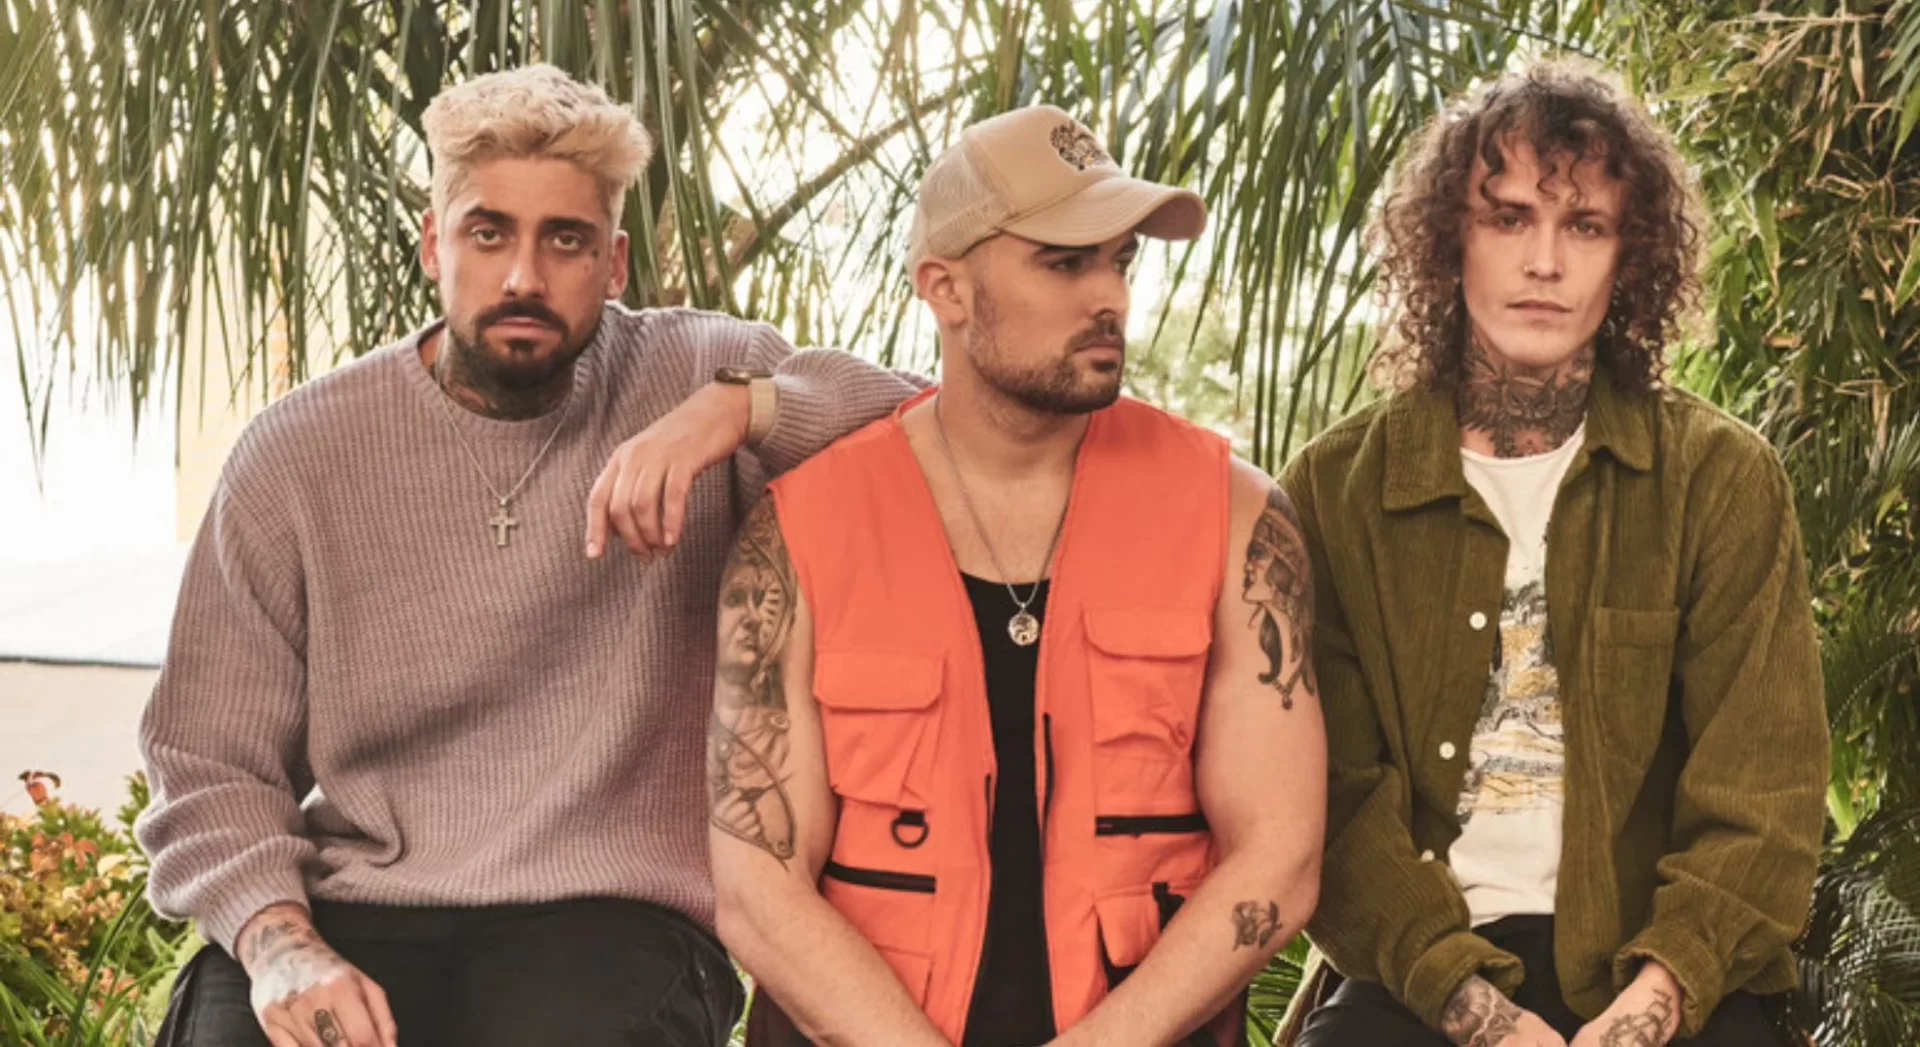 Cheat Codes &Quot;One Night In Nashville&Quot; Album Review, Yours Truly, Reviews, March 22, 2023